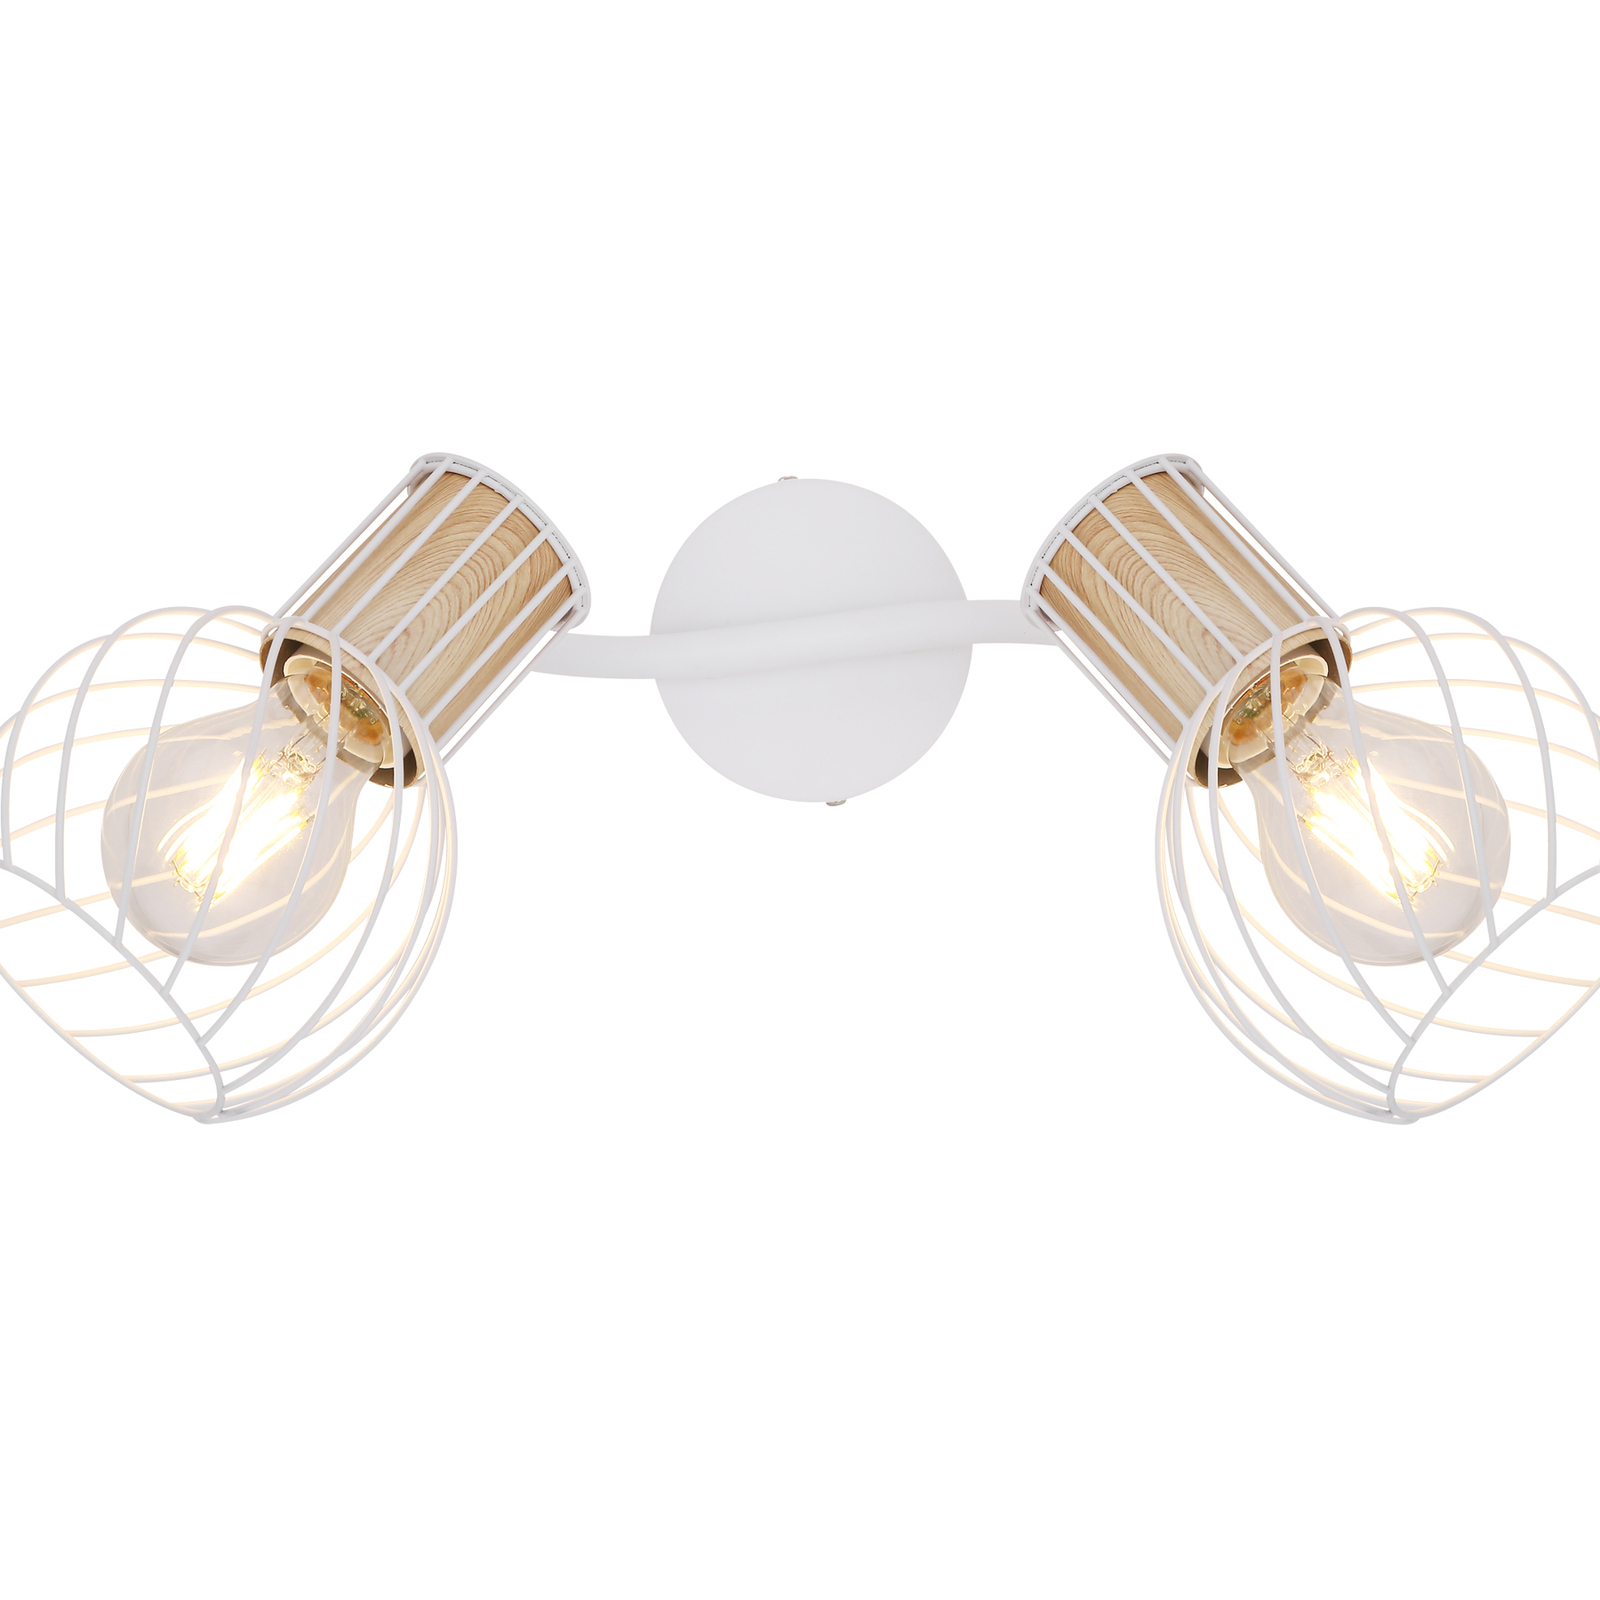 Luise ceiling light, white, wooden look, 2-bulb